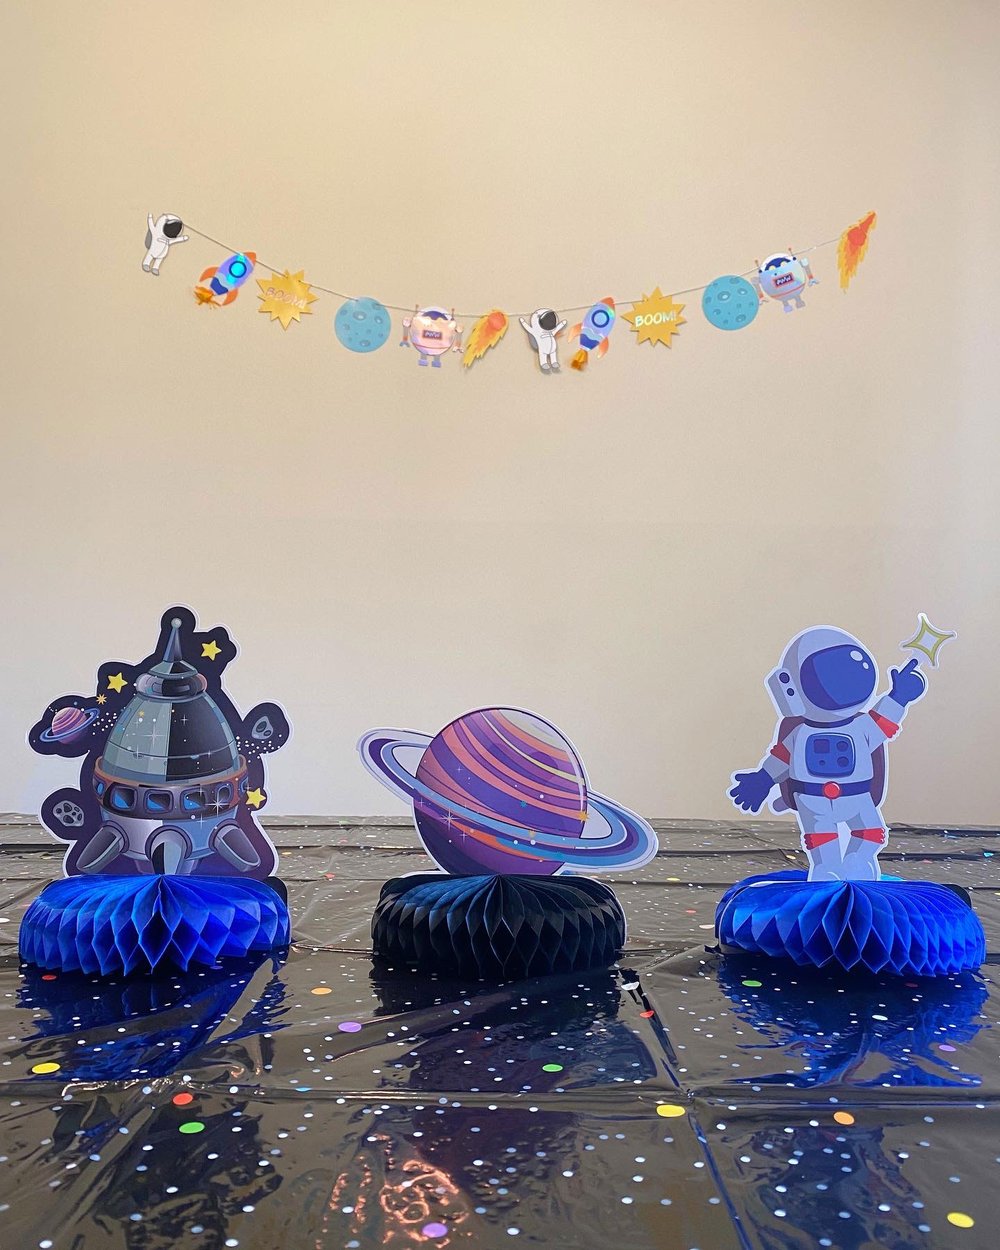 Space Party Ideas | outer space birthday party | space birthday party | space Photo Booth | out of this world birthday party | space party games | space birthday decoration | kids birthday party ideas